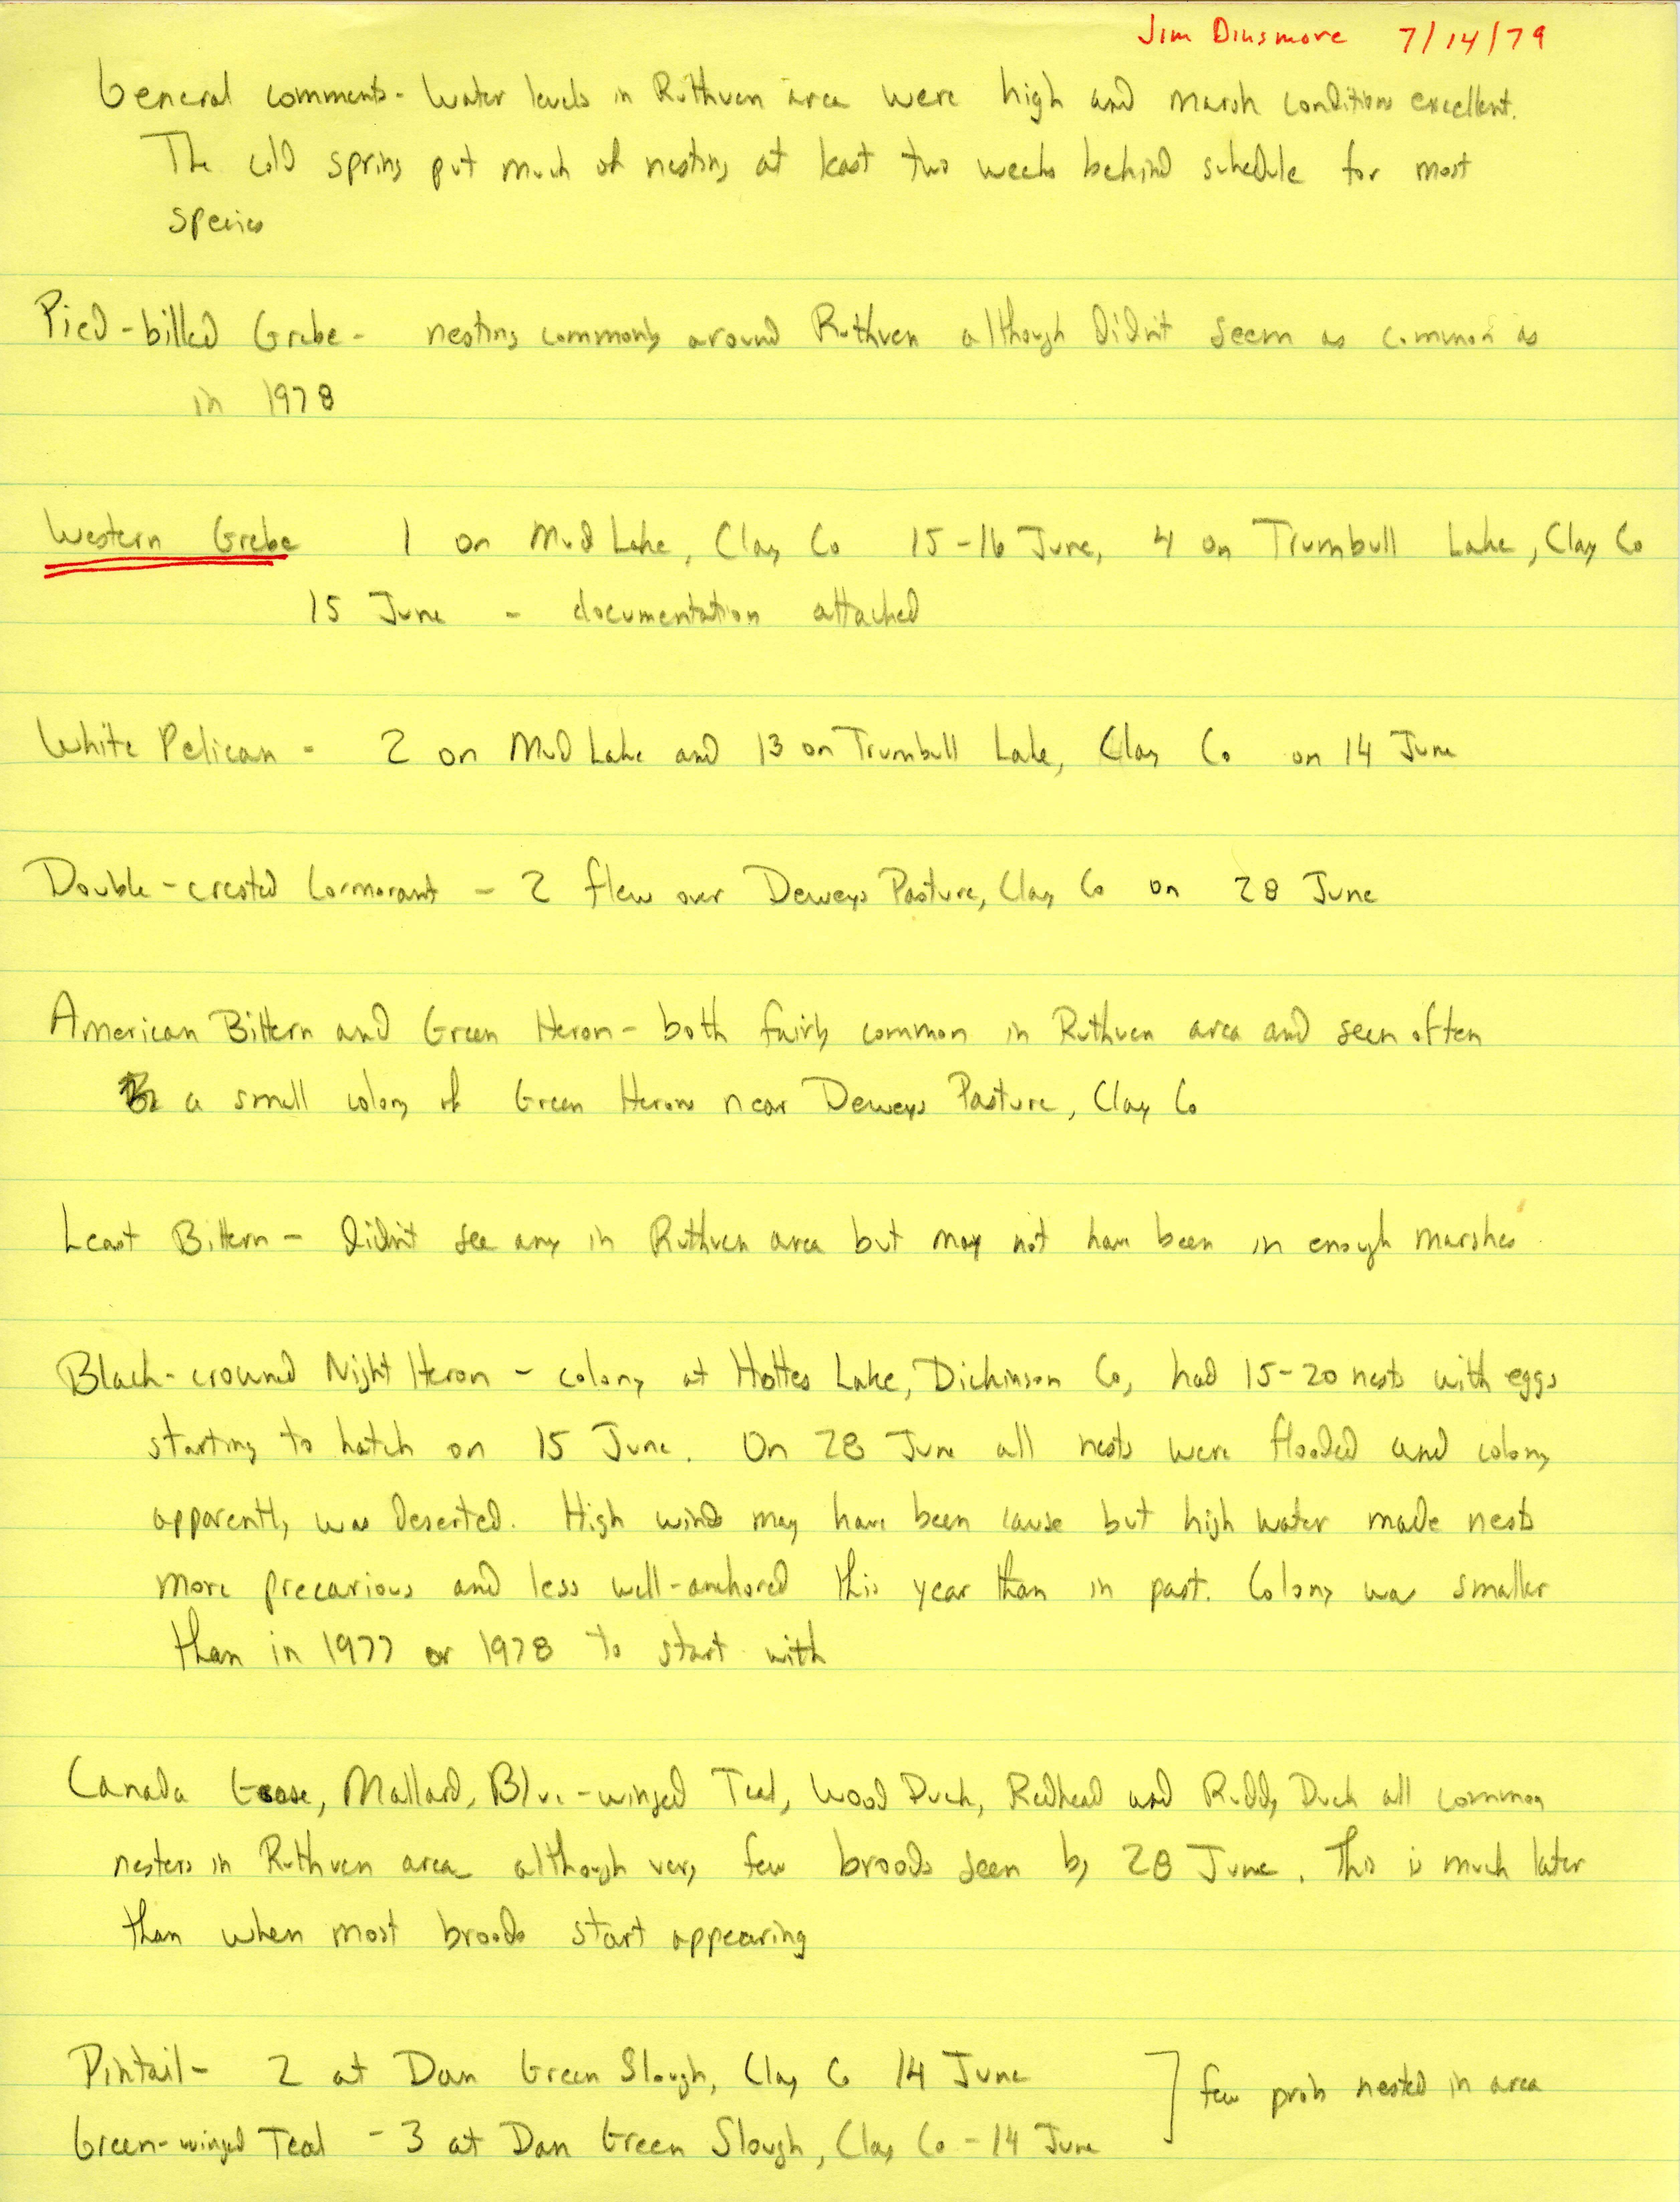 Field notes contributed by James J. Dinsmore, July 14, 1979